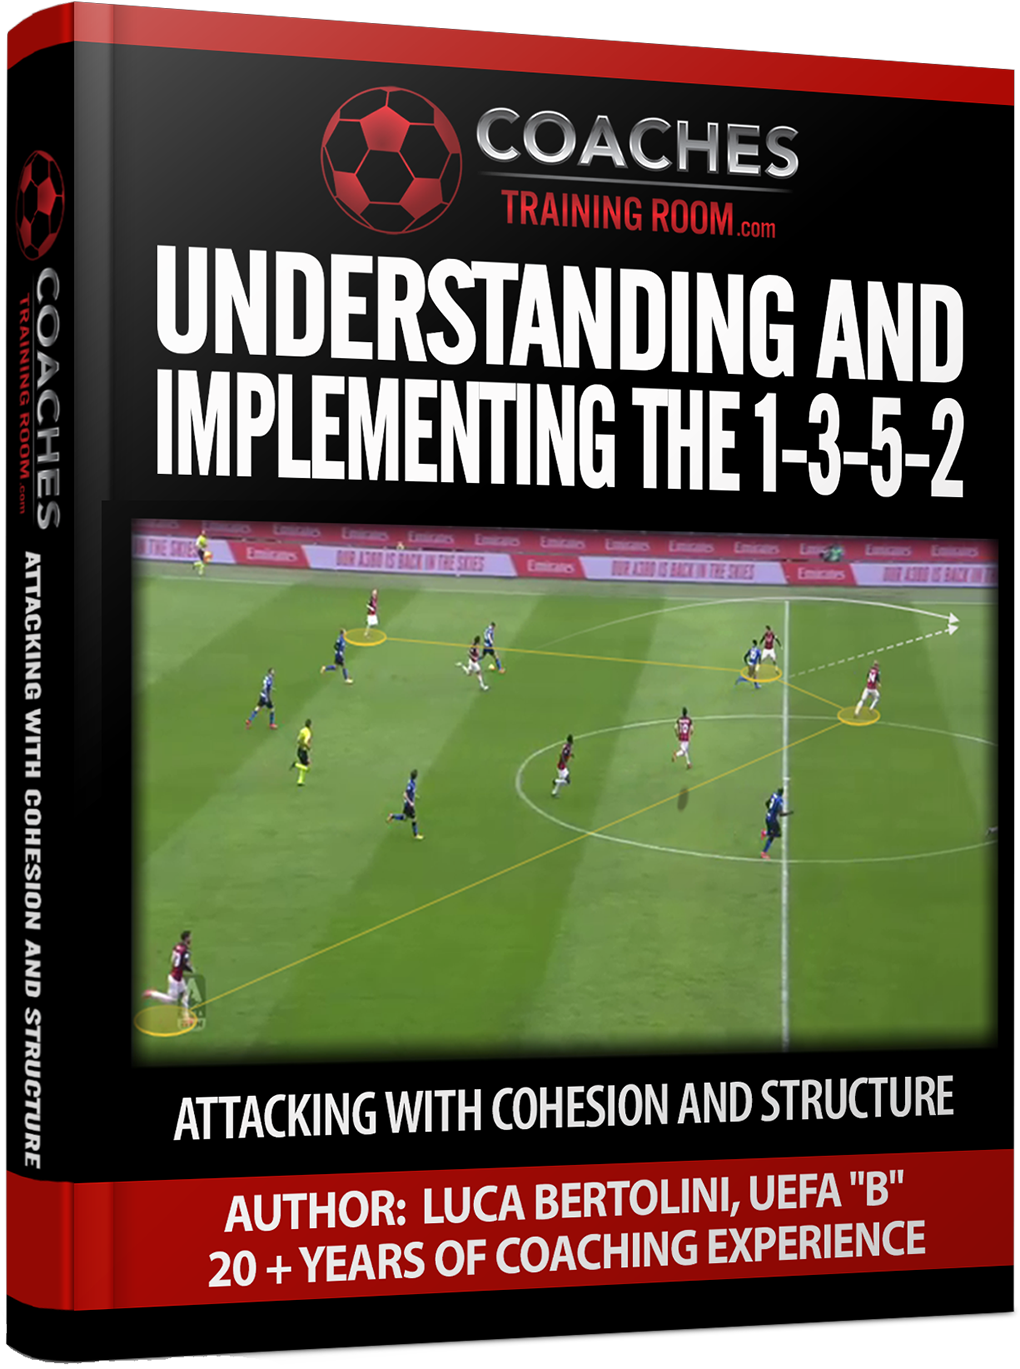 Understanding and Implementing the 1-3-5-2 - Attacking with Cohesion and Structure by Luca Bertolini - Coaches Training Room